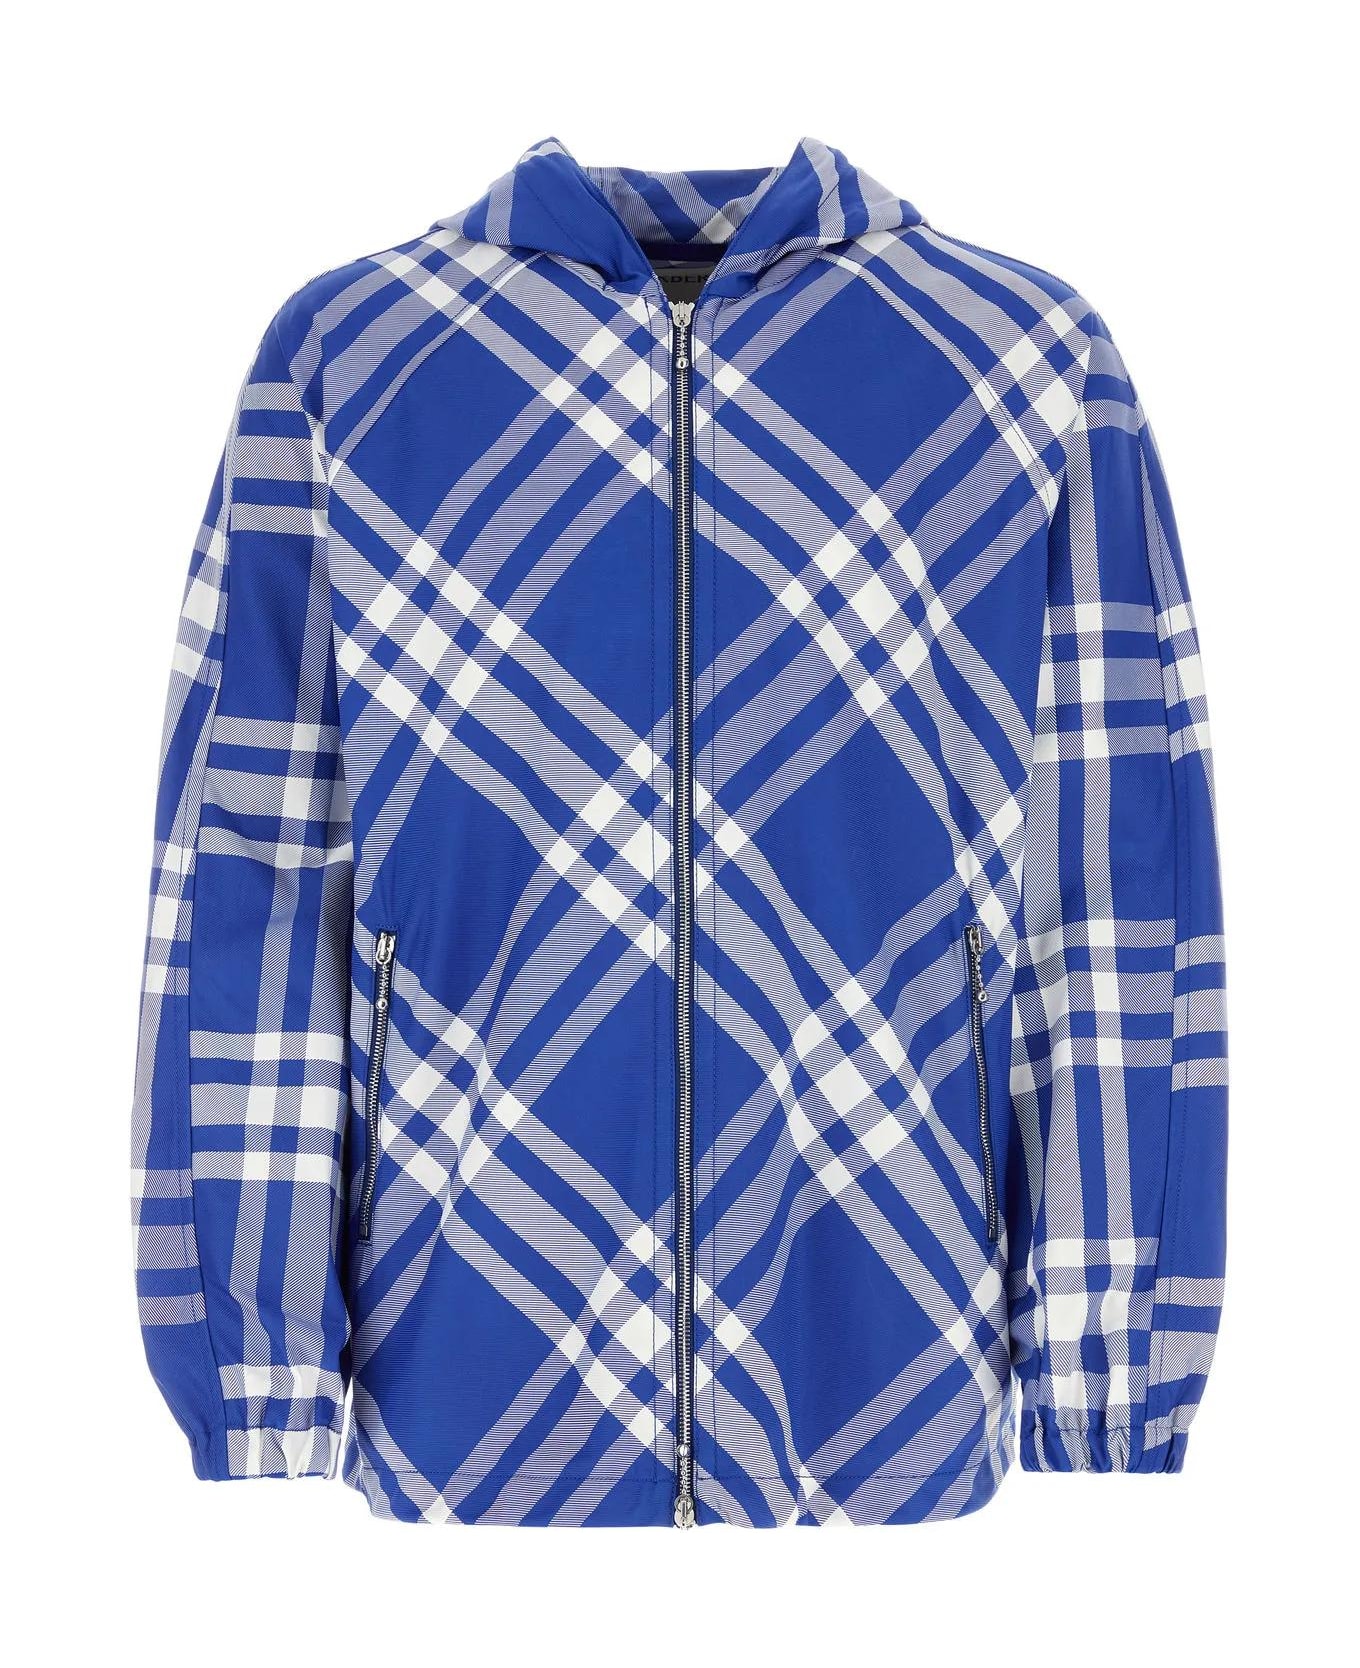 Burberry Embroidered Nylon Jacket - Knight ip check